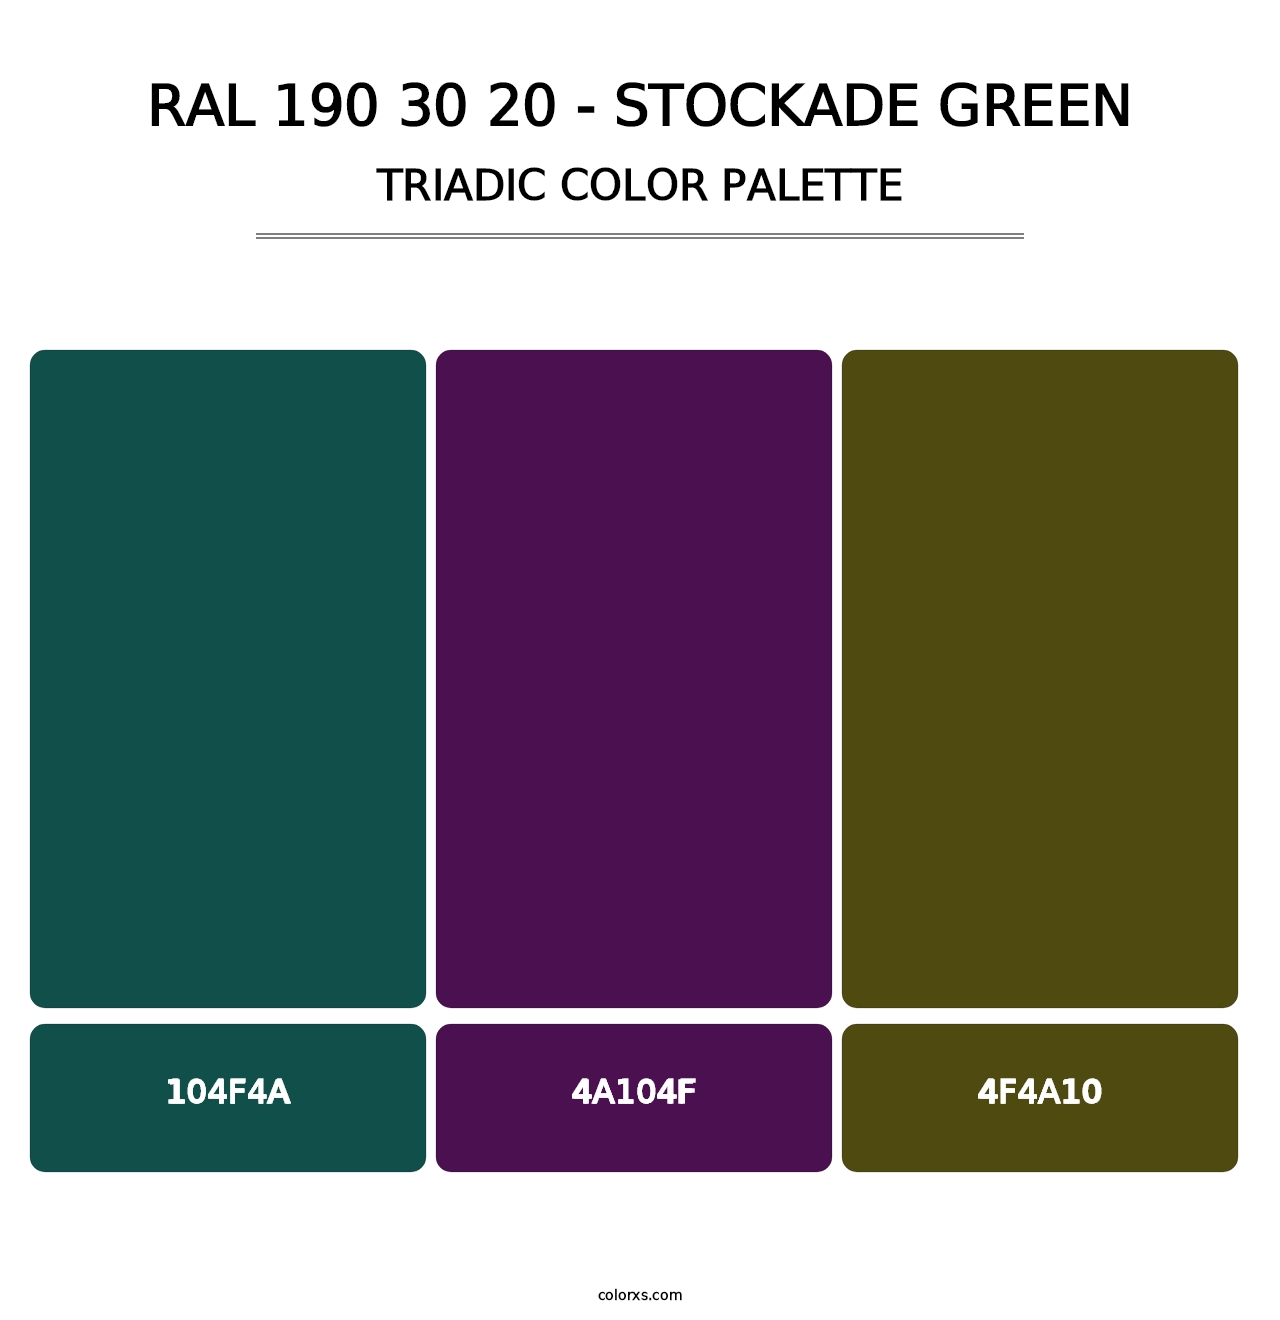 RAL 190 30 20 - Stockade Green - Triadic Color Palette